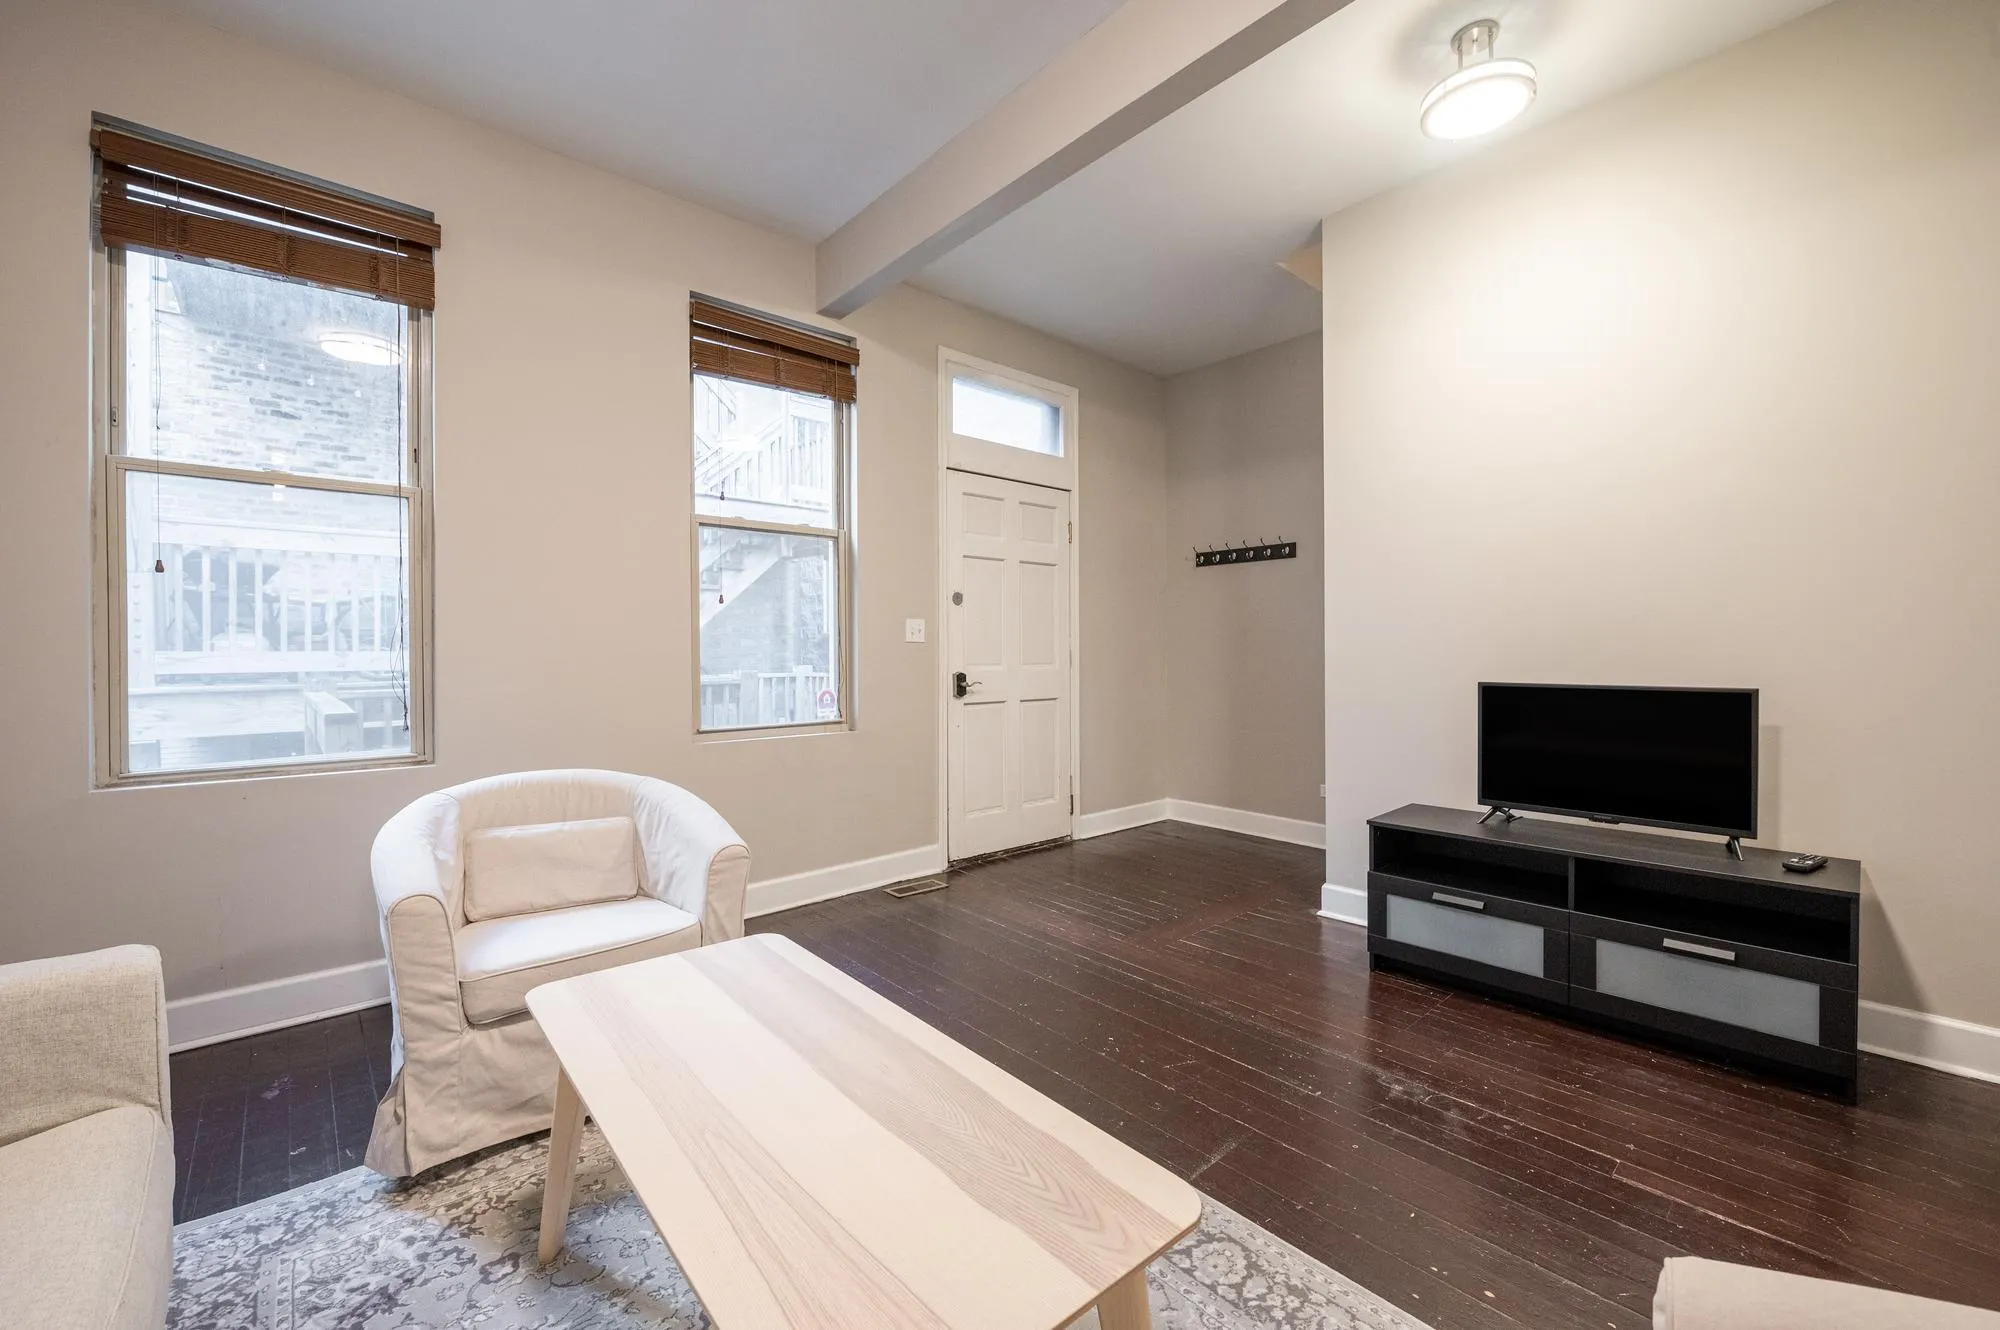 1847 W ARMITAGE AVE 60622-Room For Rent-unit#3-R-Chicago-IL